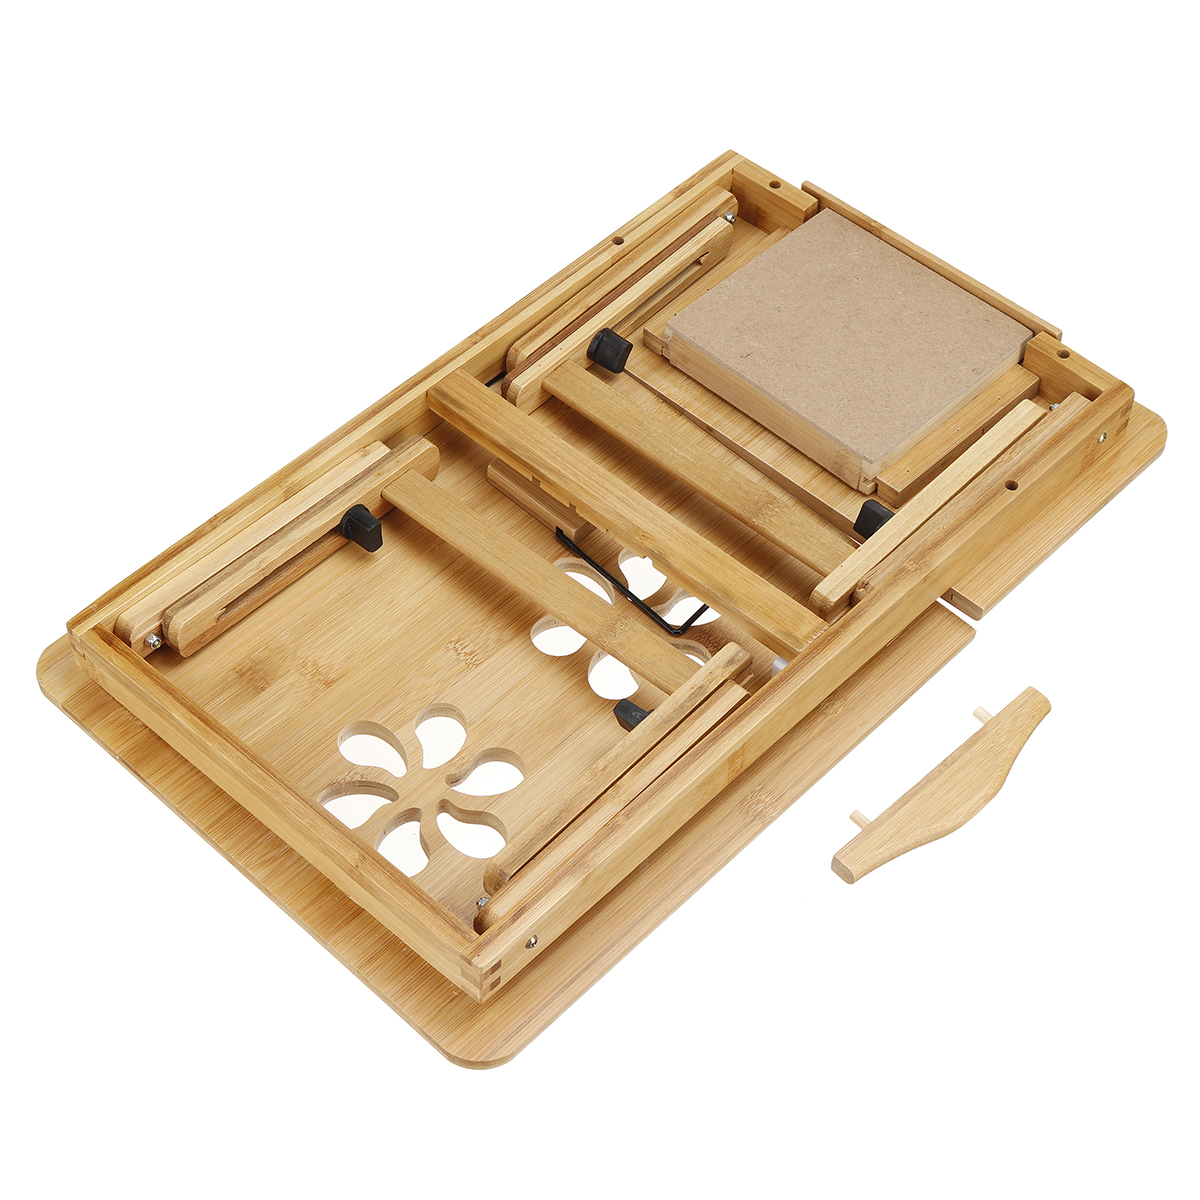 Portable-Deluxe-Bamboo-Laptop-Bed-Desk-Table-Foldable-Workstation-Tray-Lap-1754566-14